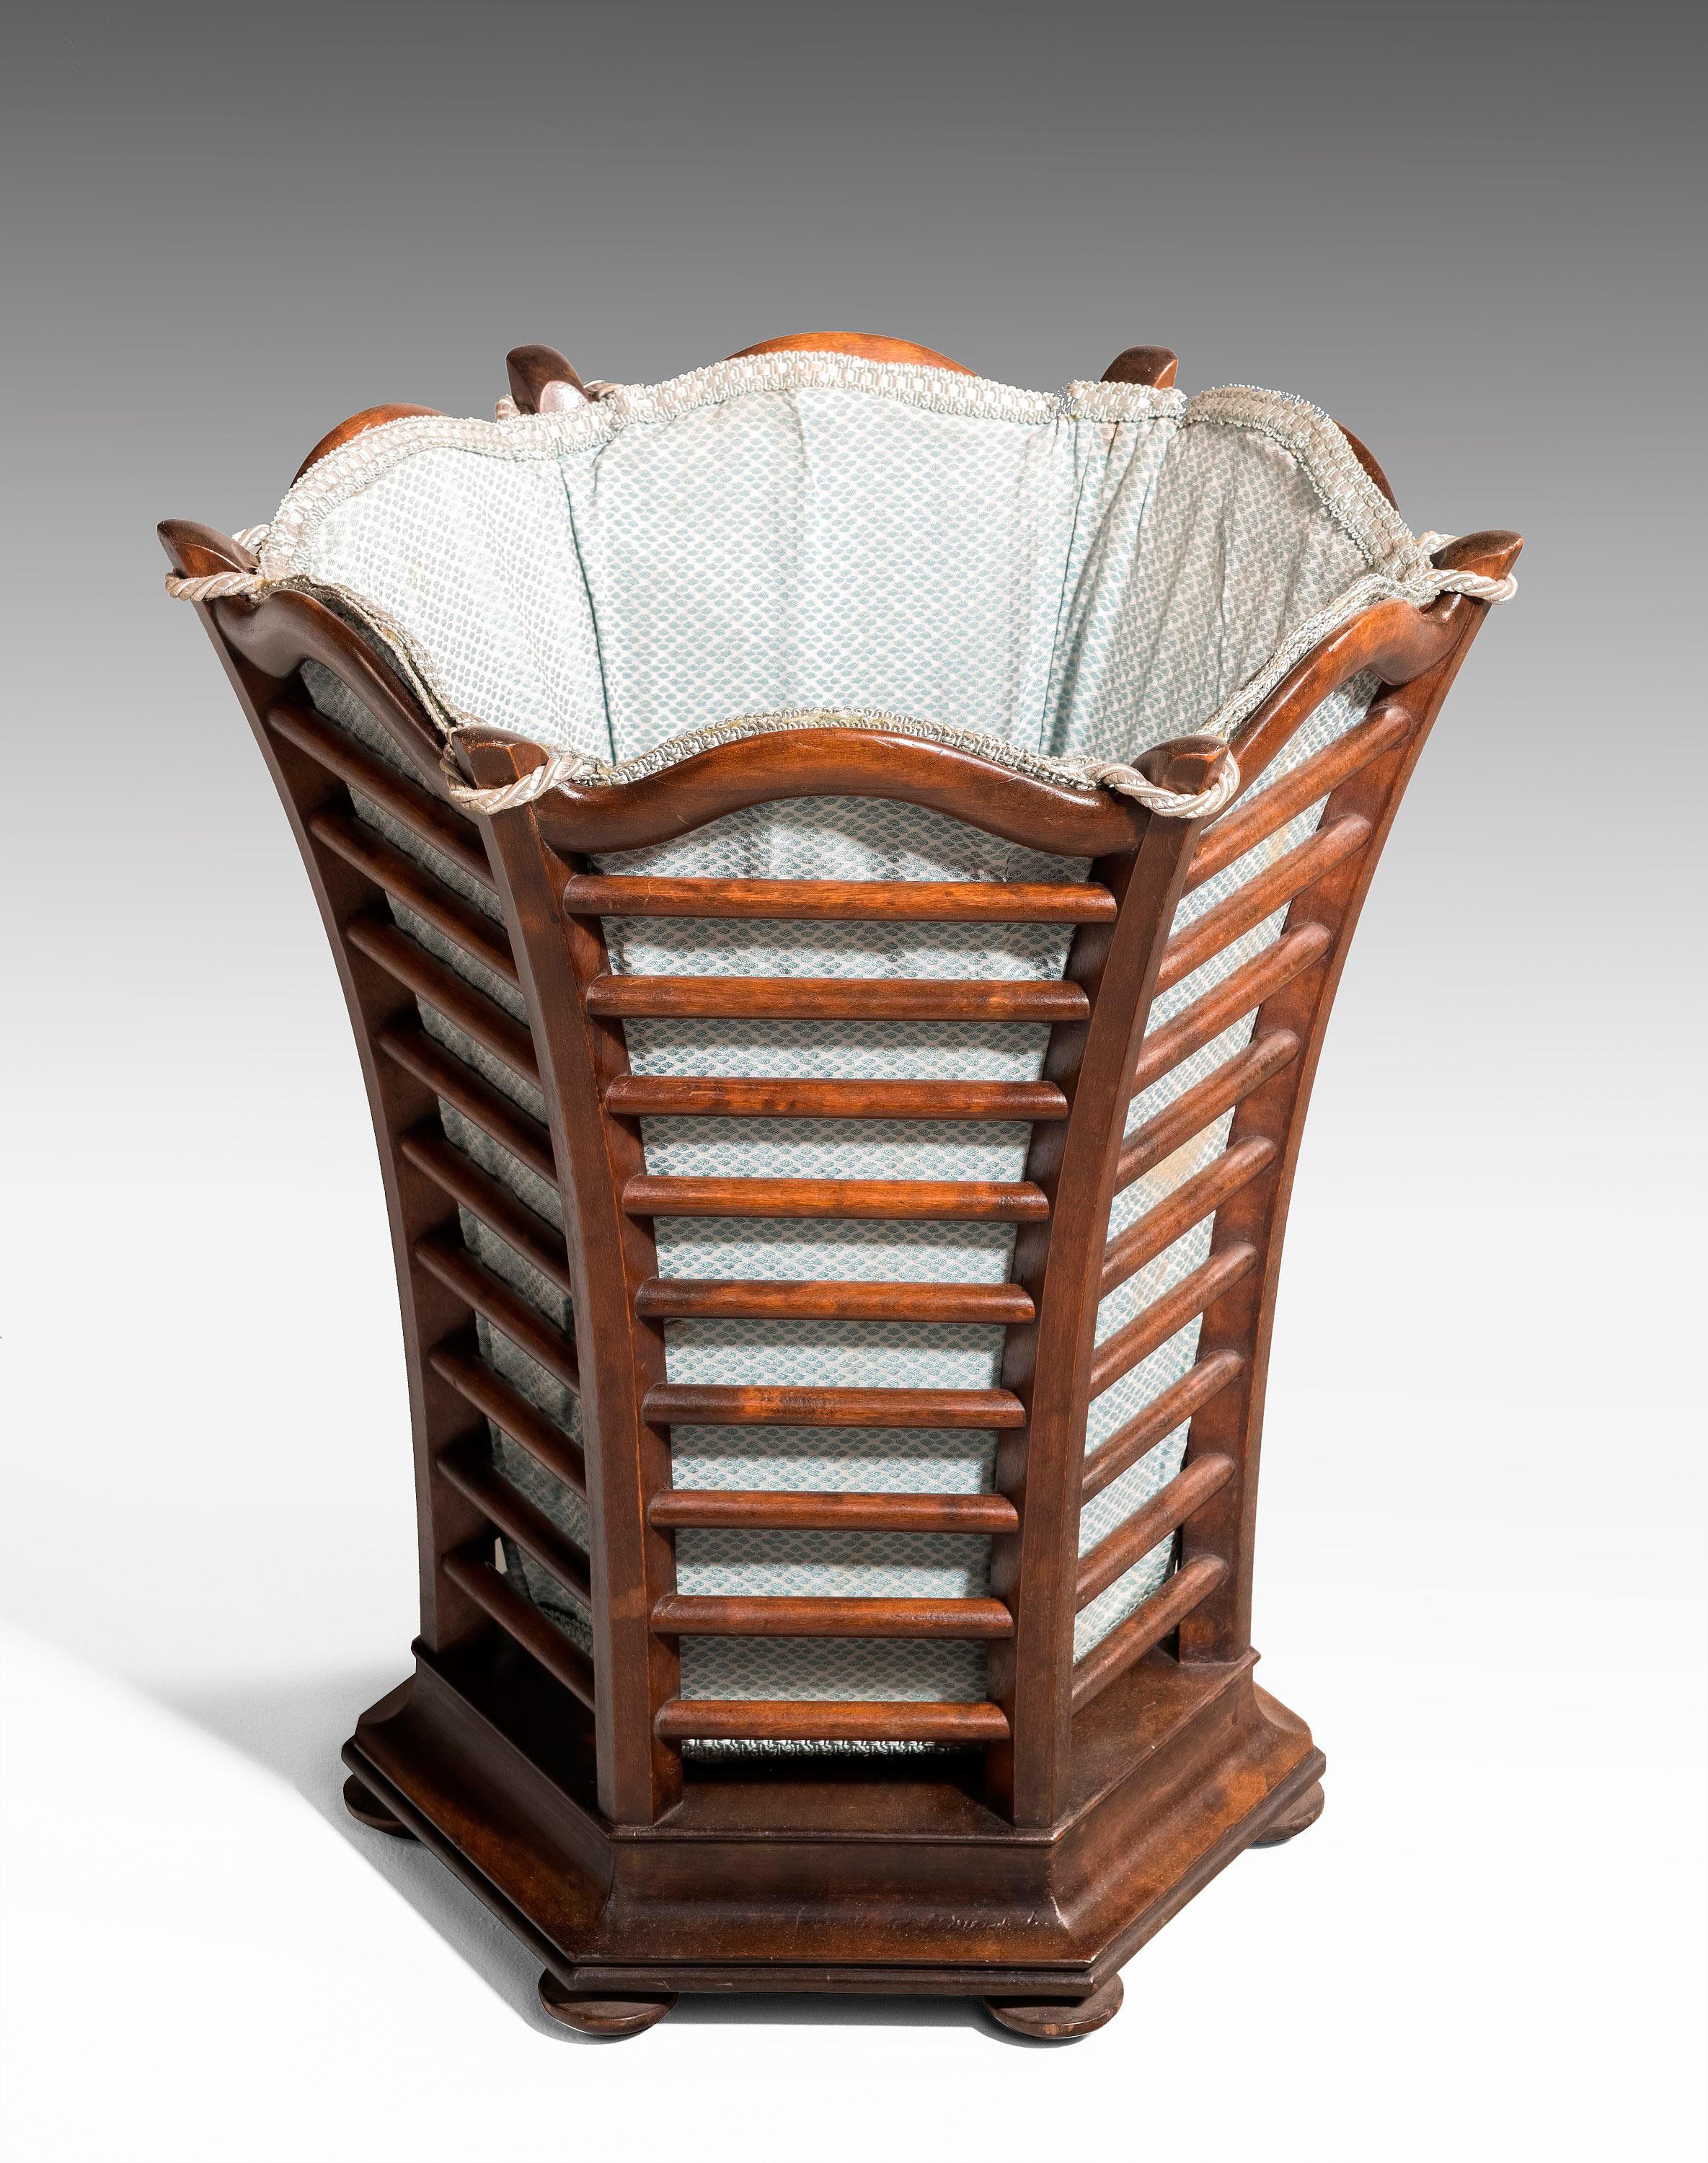 Late 19th Century Mahogany Waste Paper Basket In Good Condition For Sale In Peterborough, Northamptonshire